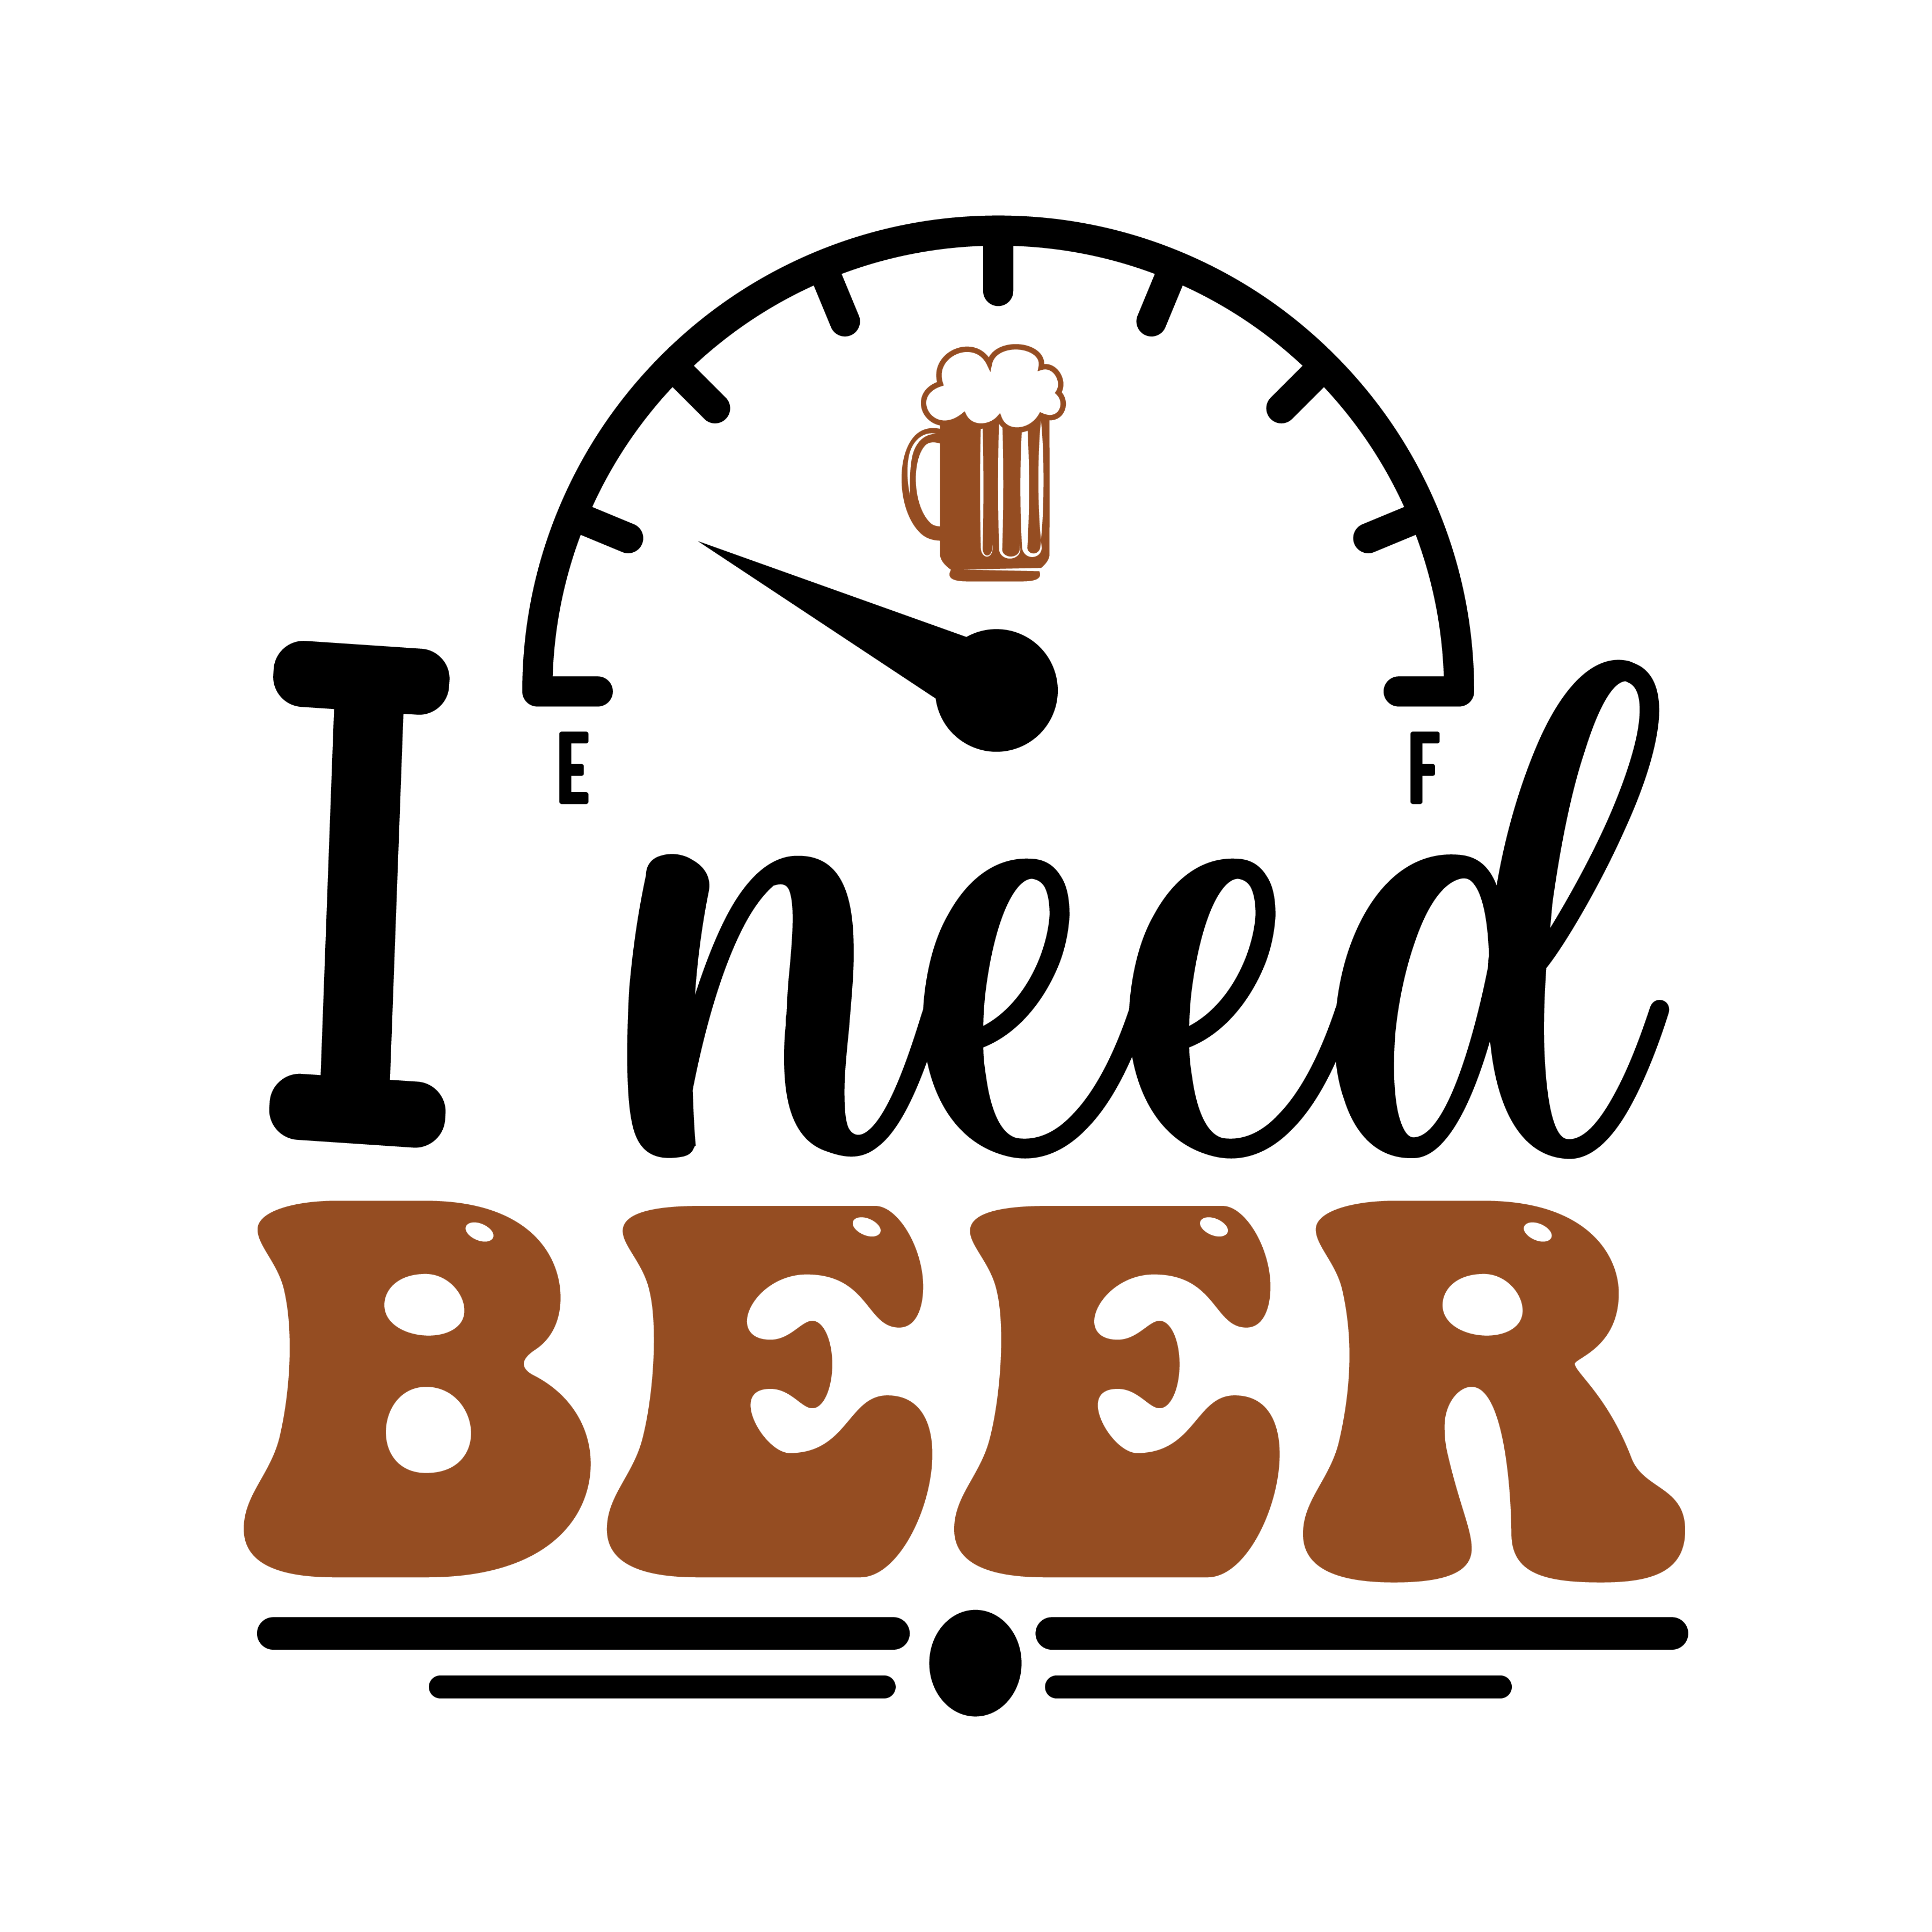 i need beer, beer quotes, beer sayings, Cricut designs, free, clip art, svg file, template, pattern, stencil, silhouette, cut file, design space, vector, shirt, cup, DIY crafts and projects, embroidery